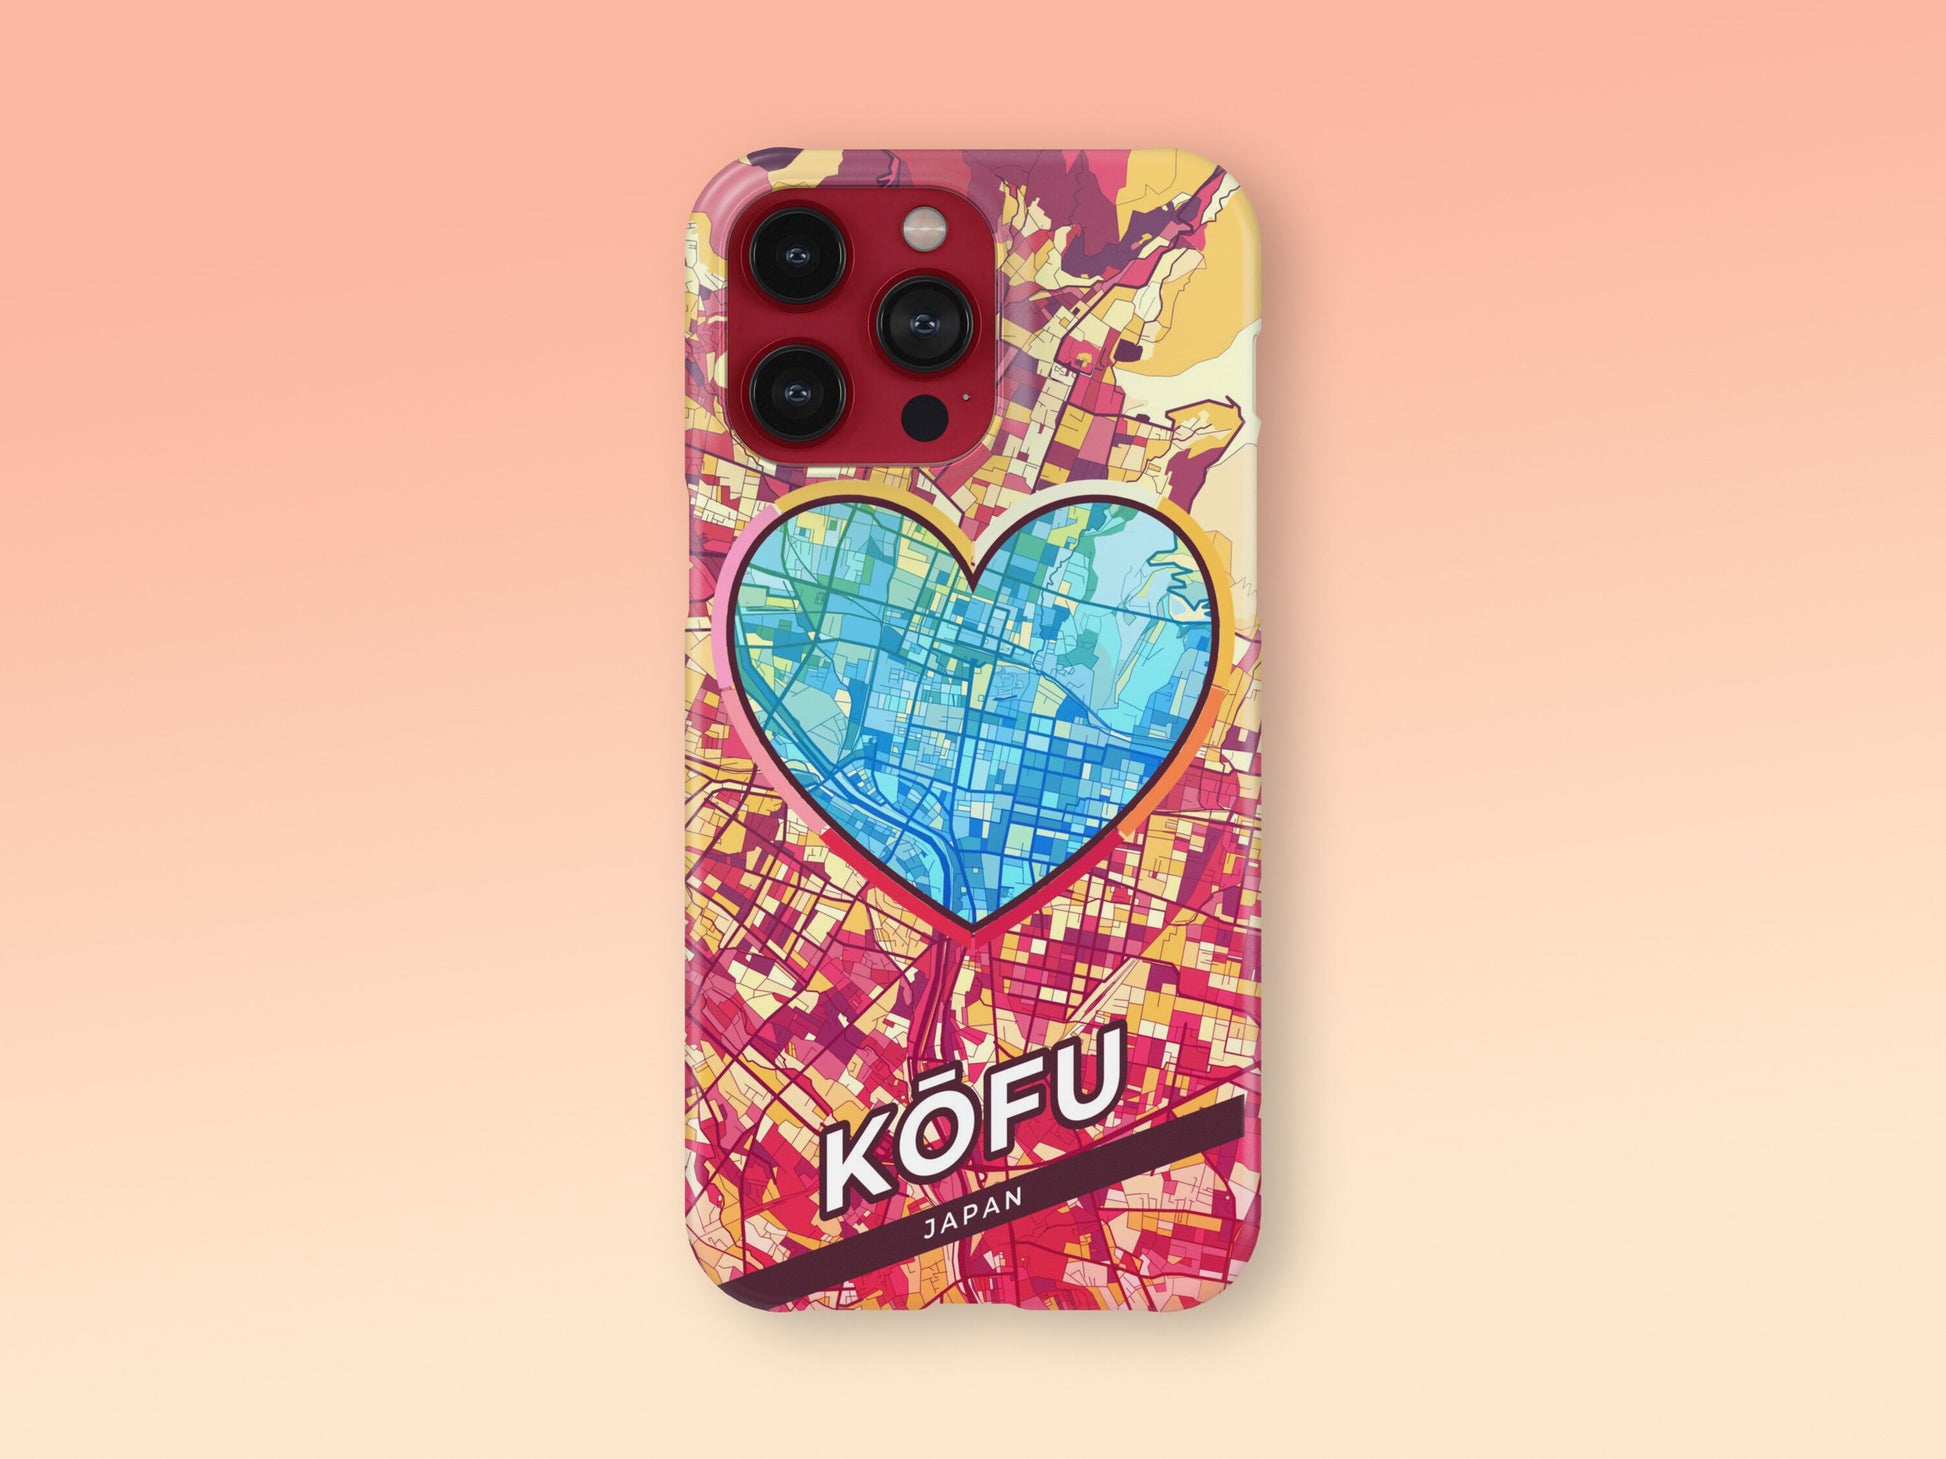 Kōfu Japan slim phone case with colorful icon. Birthday, wedding or housewarming gift. Couple match cases. 2